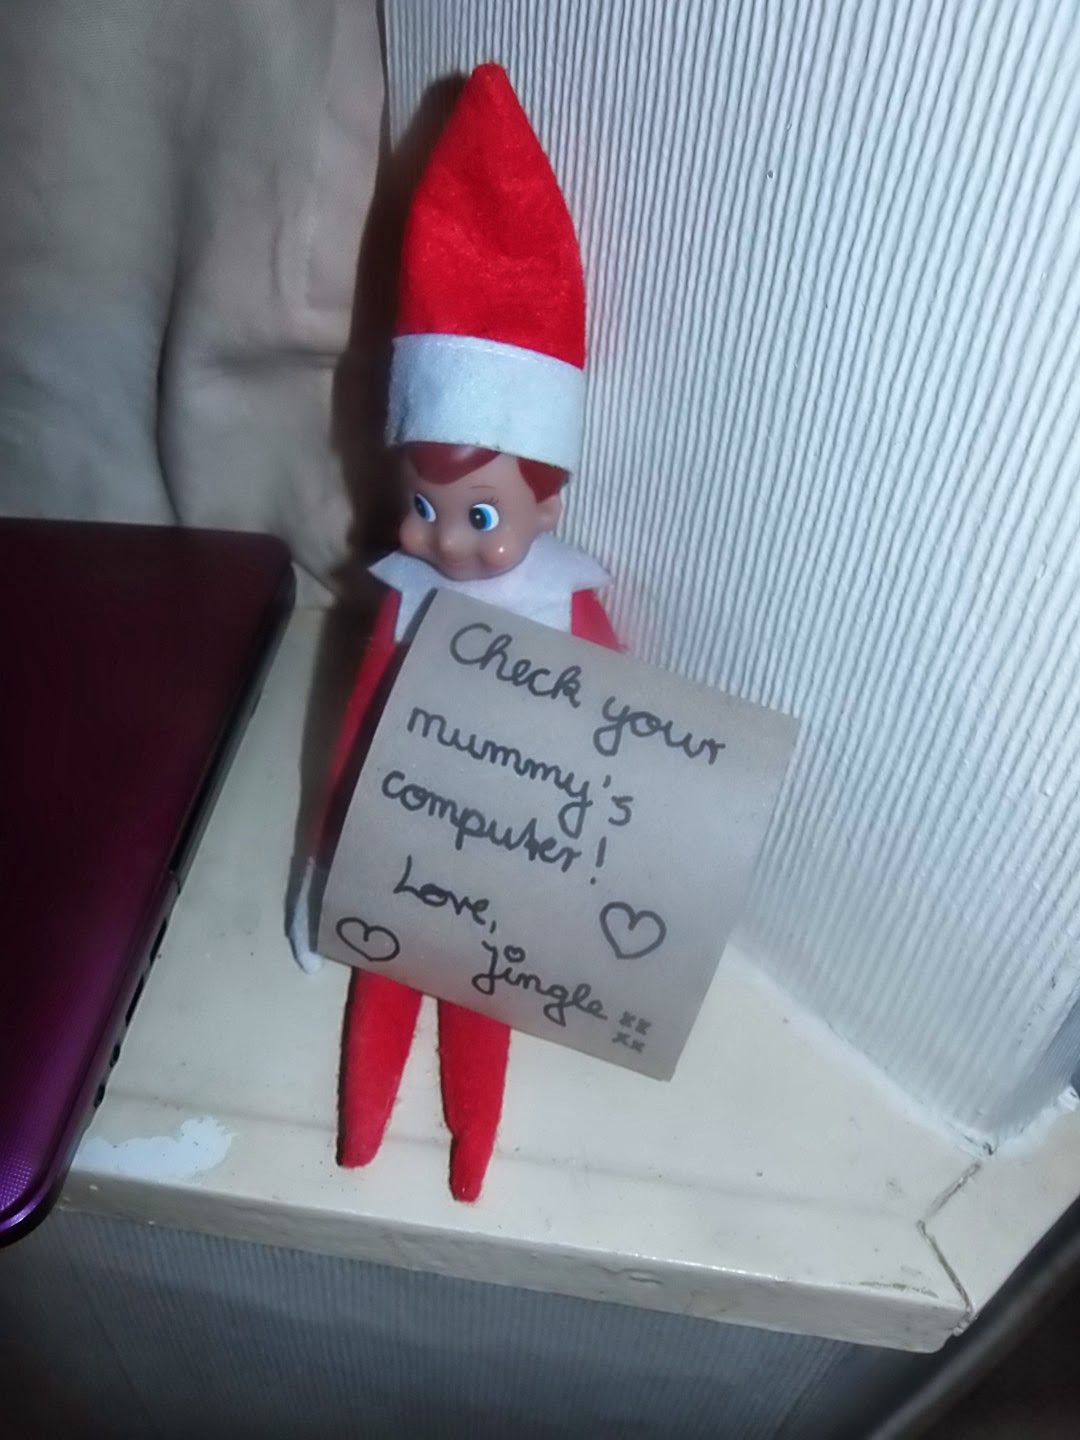 The Elf on the Shelf: Message from Santa